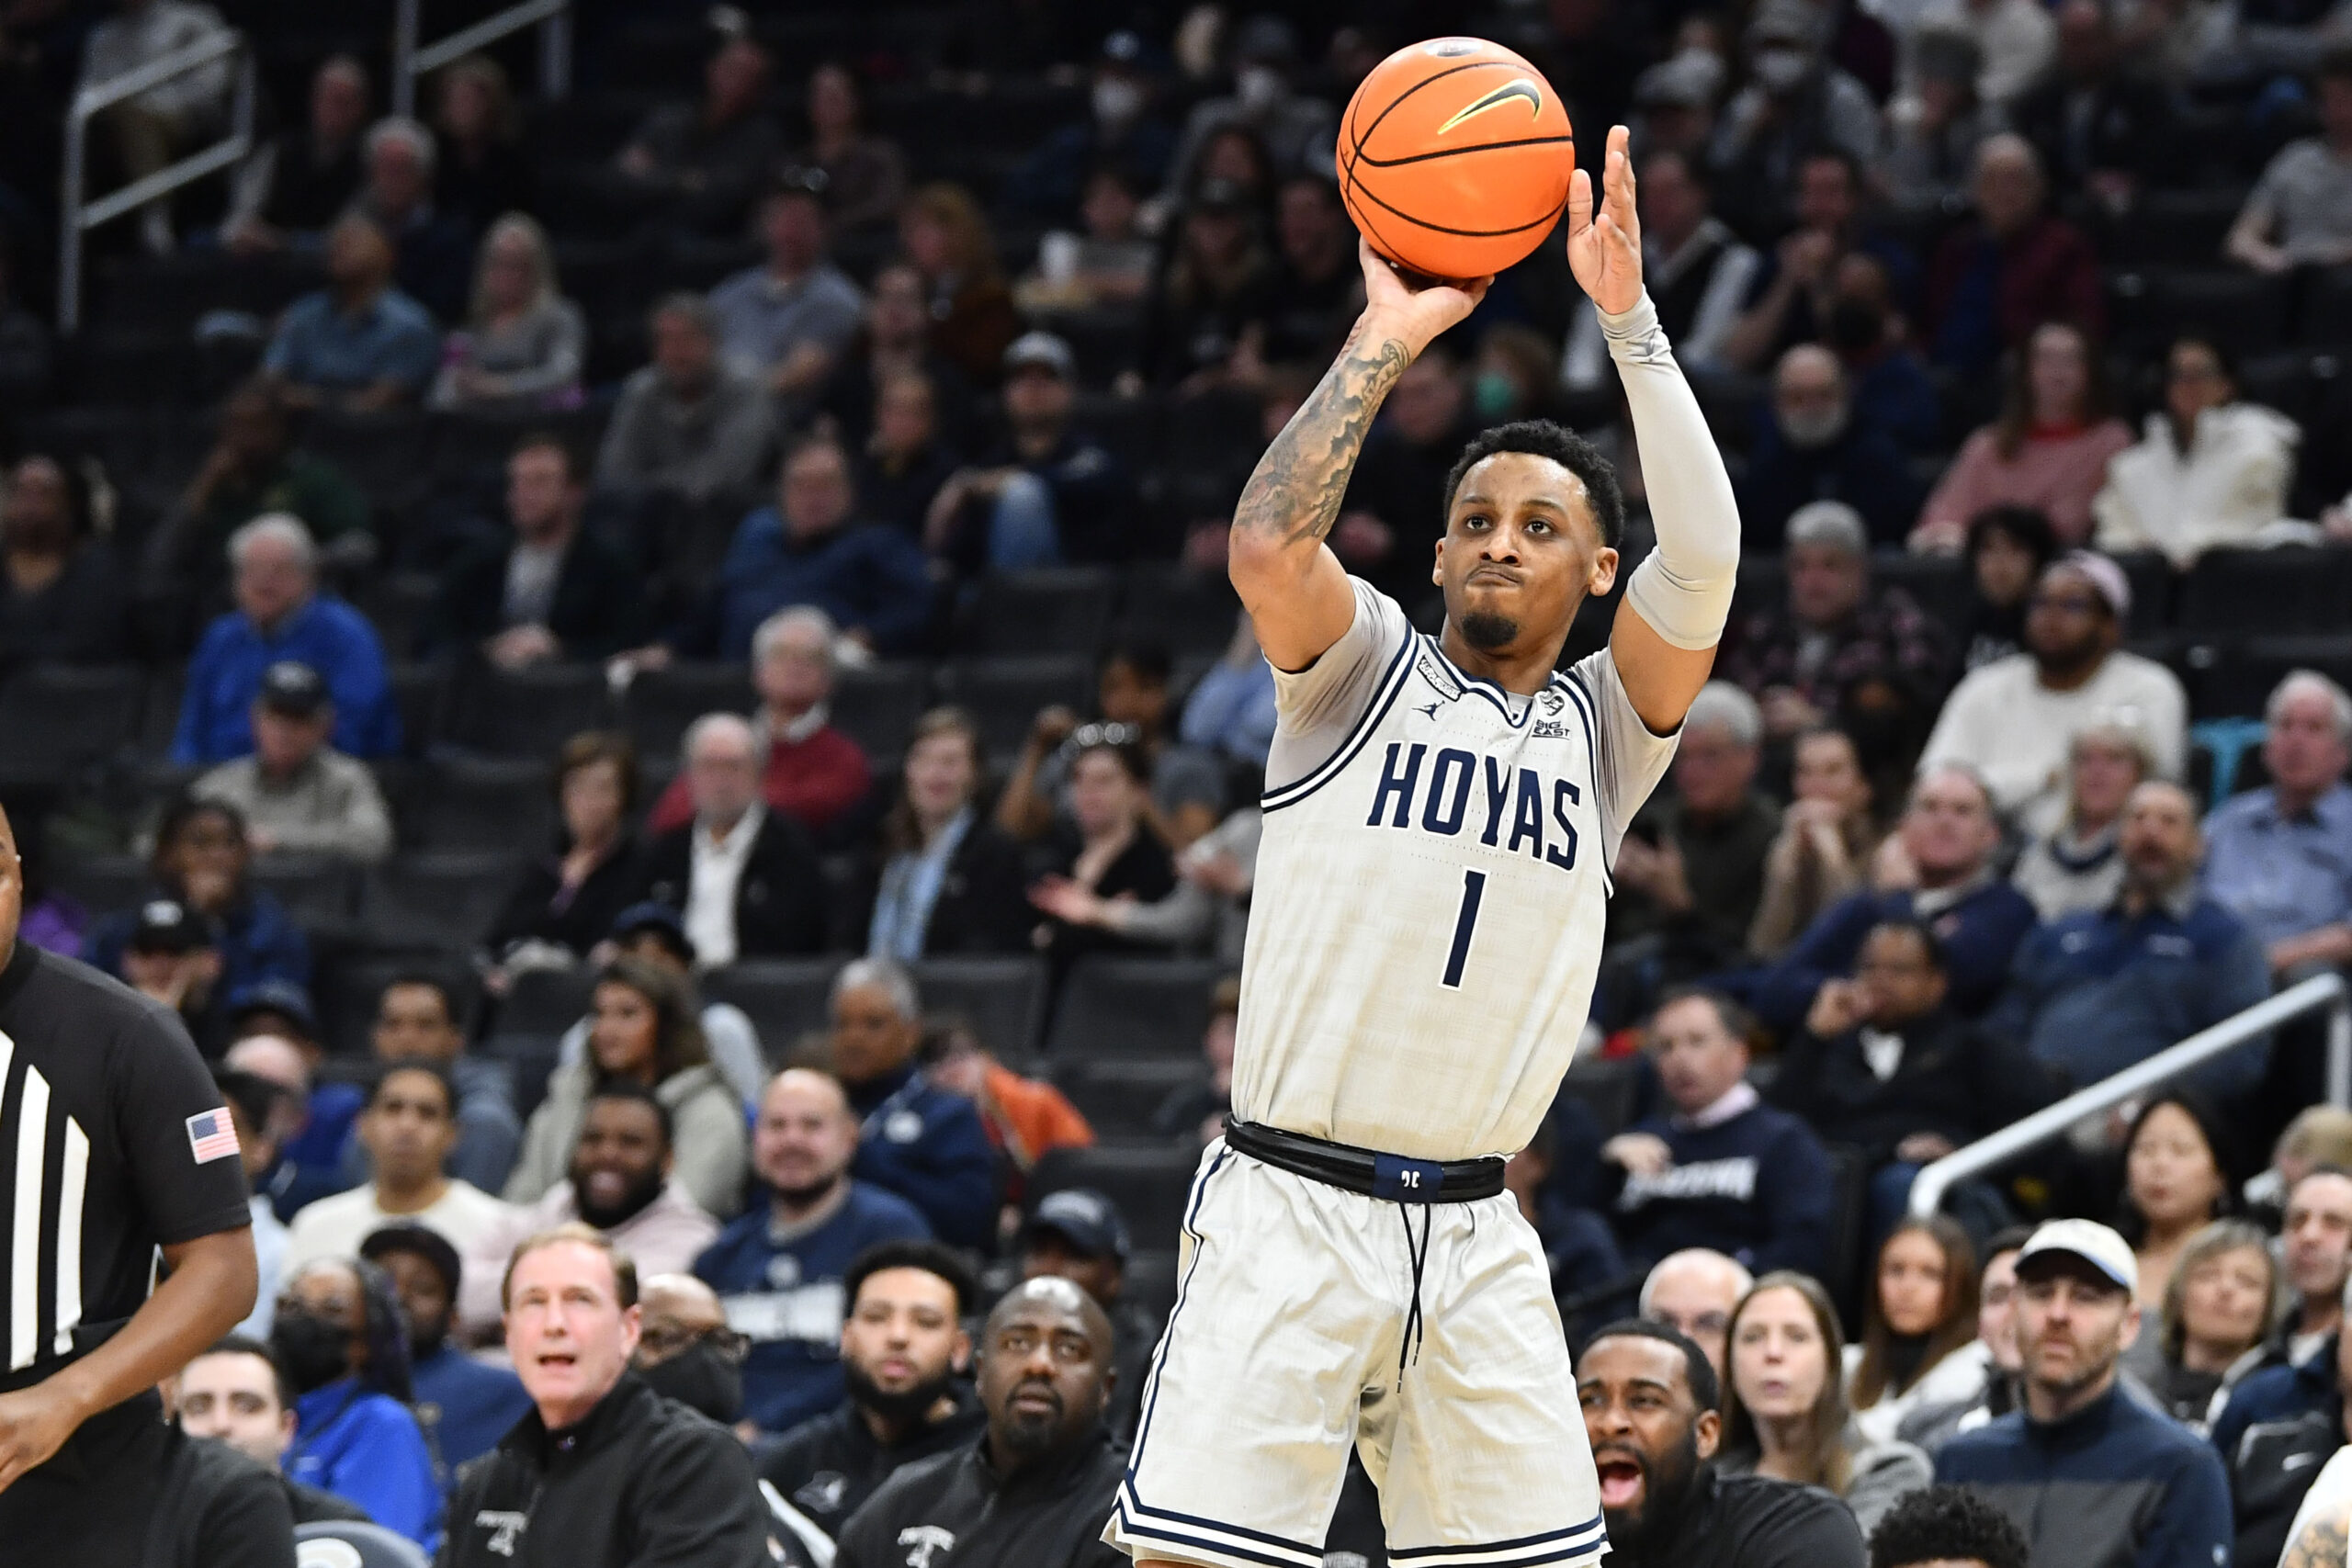 LSU has contacted talented Georgetown transfer Primo Spears, per report